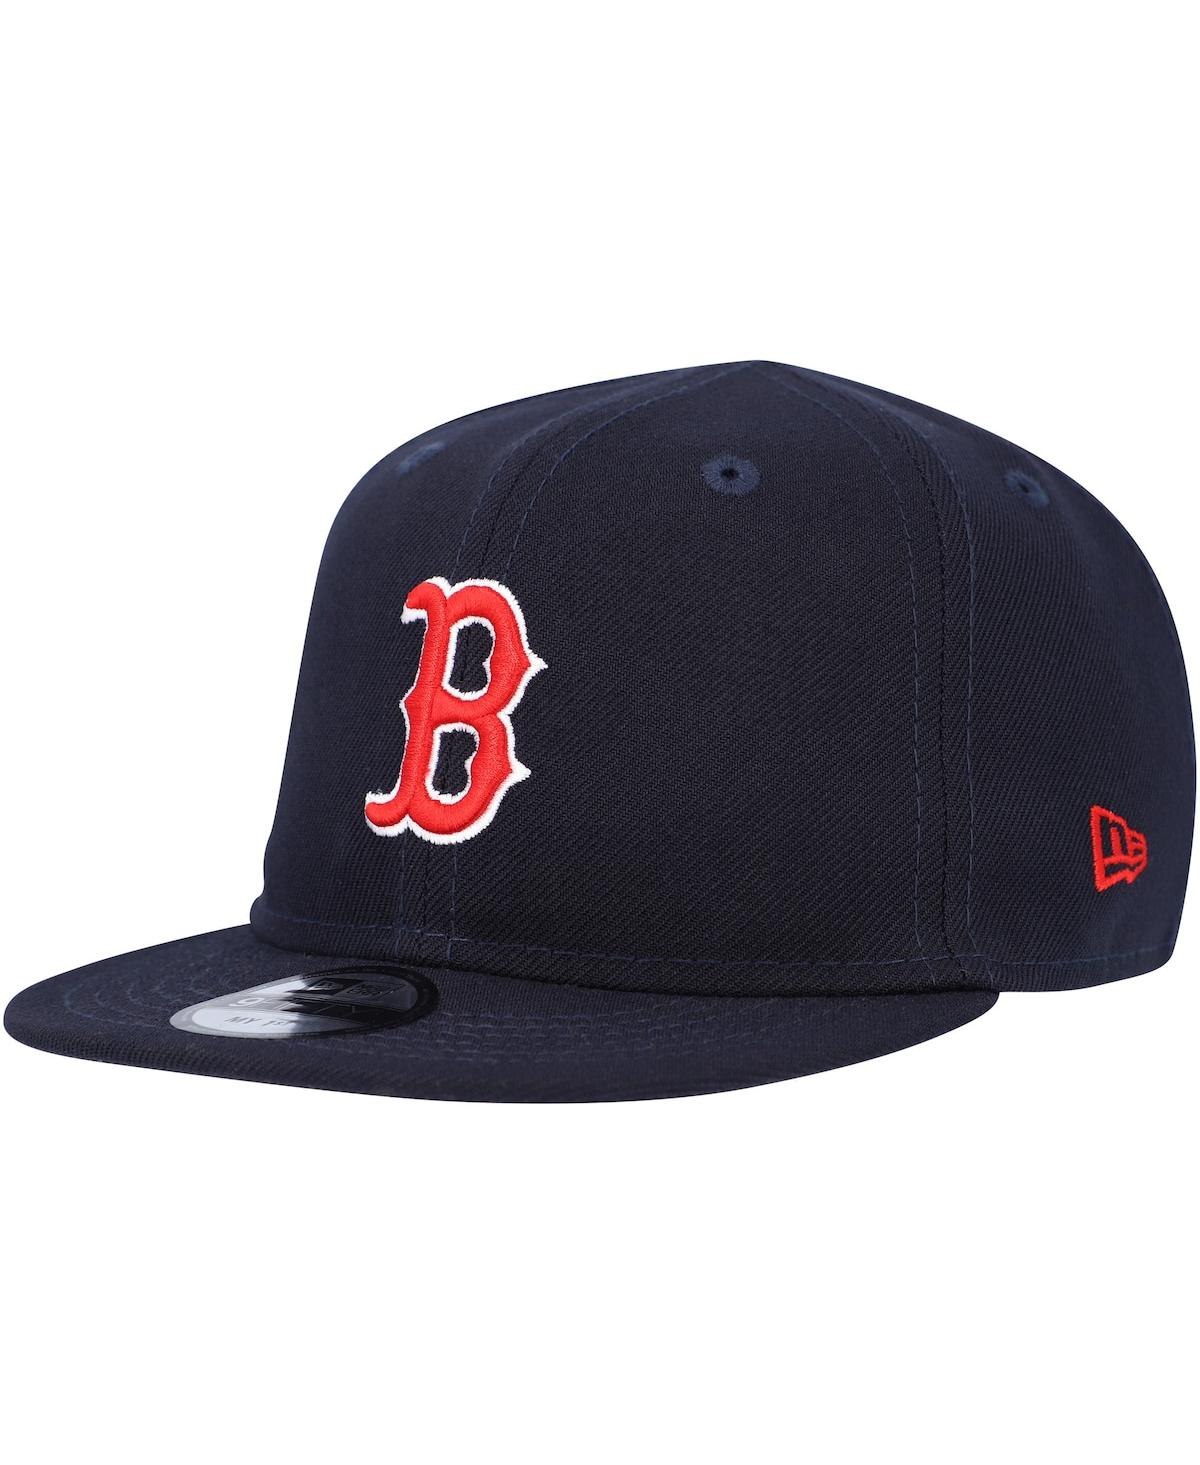 New Era Babies' Infant Boys And Girls  Navy Boston Red Sox My First 9fifty Adjustable Hat